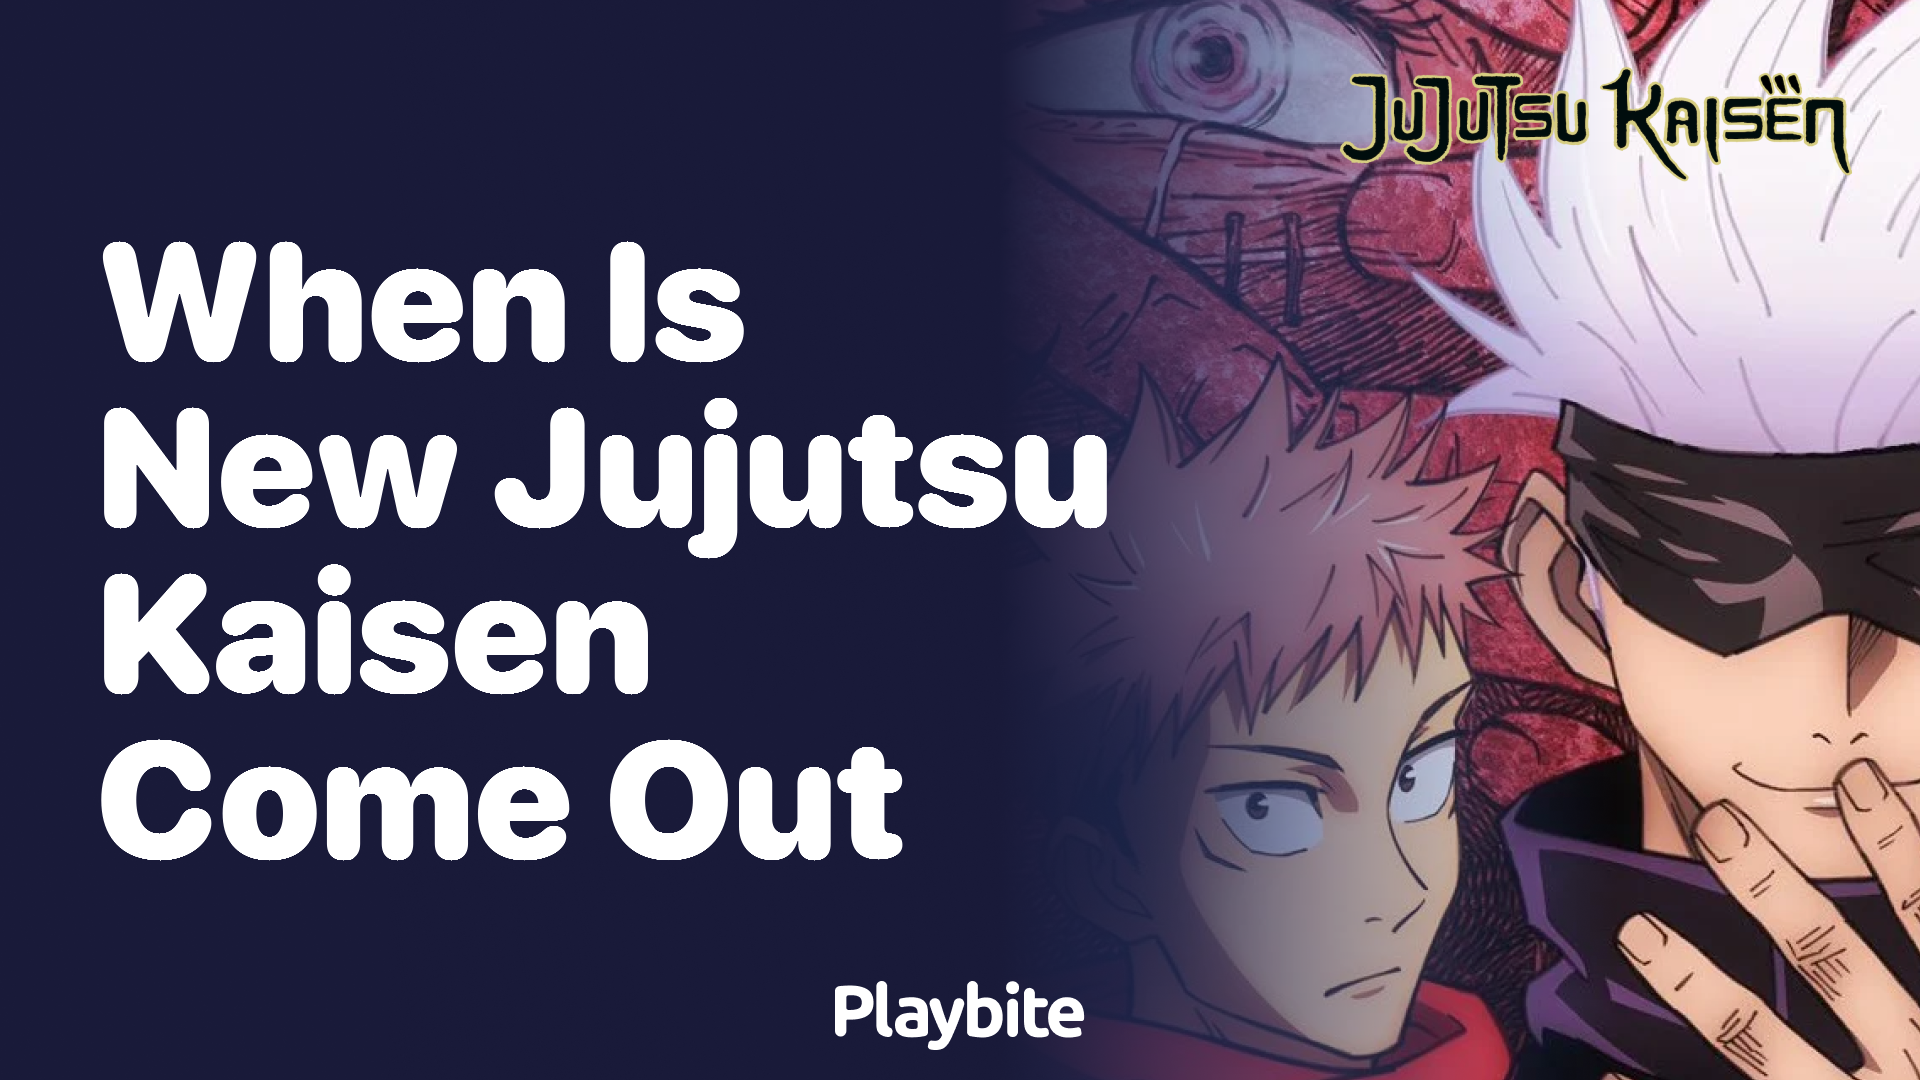 When is the new Jujutsu Kaisen coming out?